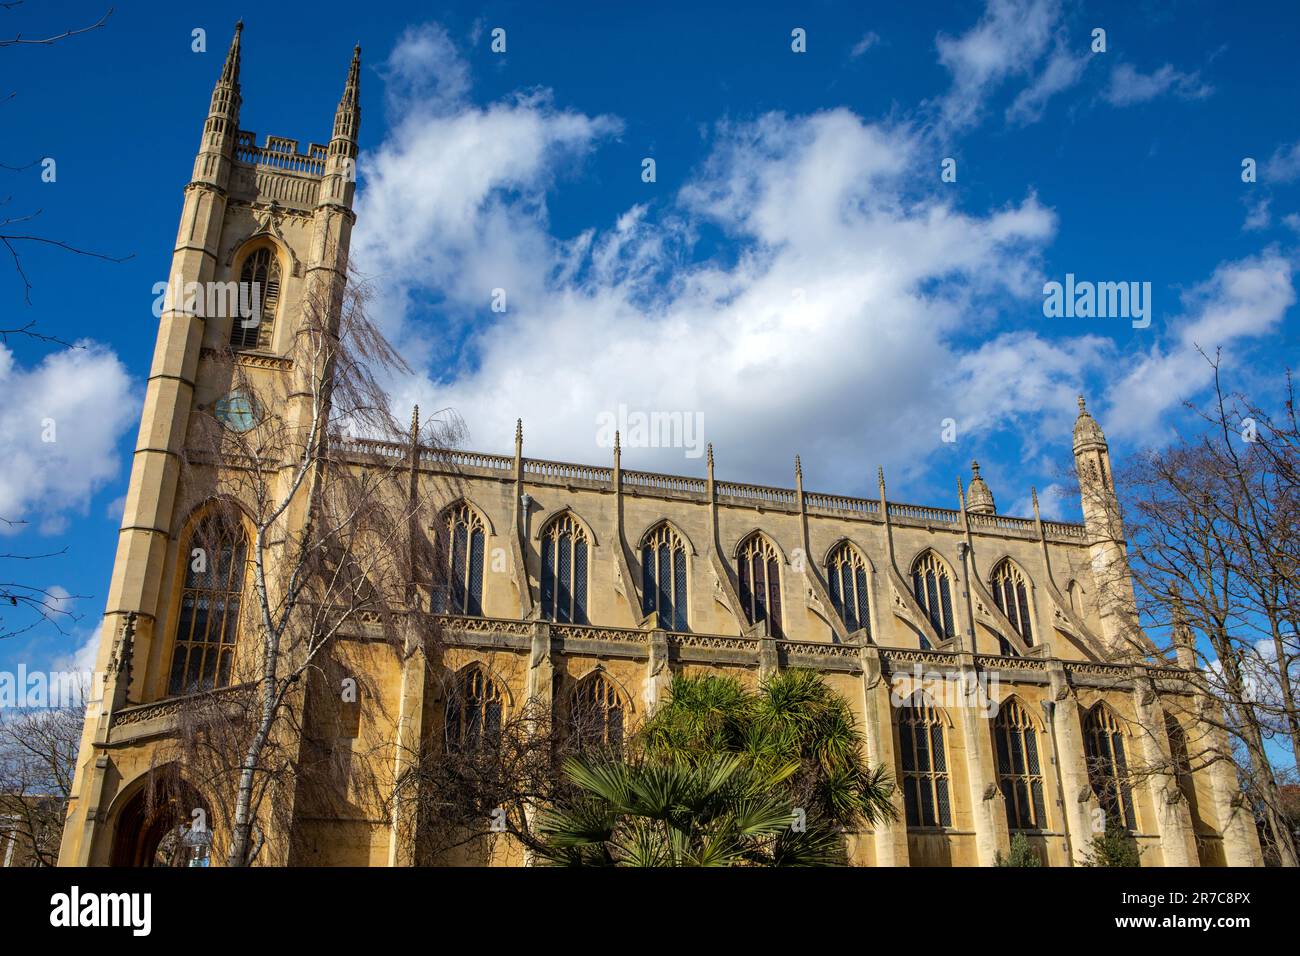 The beautiful exterior of St. Lukes Church, located on Sydney Street in Chelsea, London, UK. Stock Photo